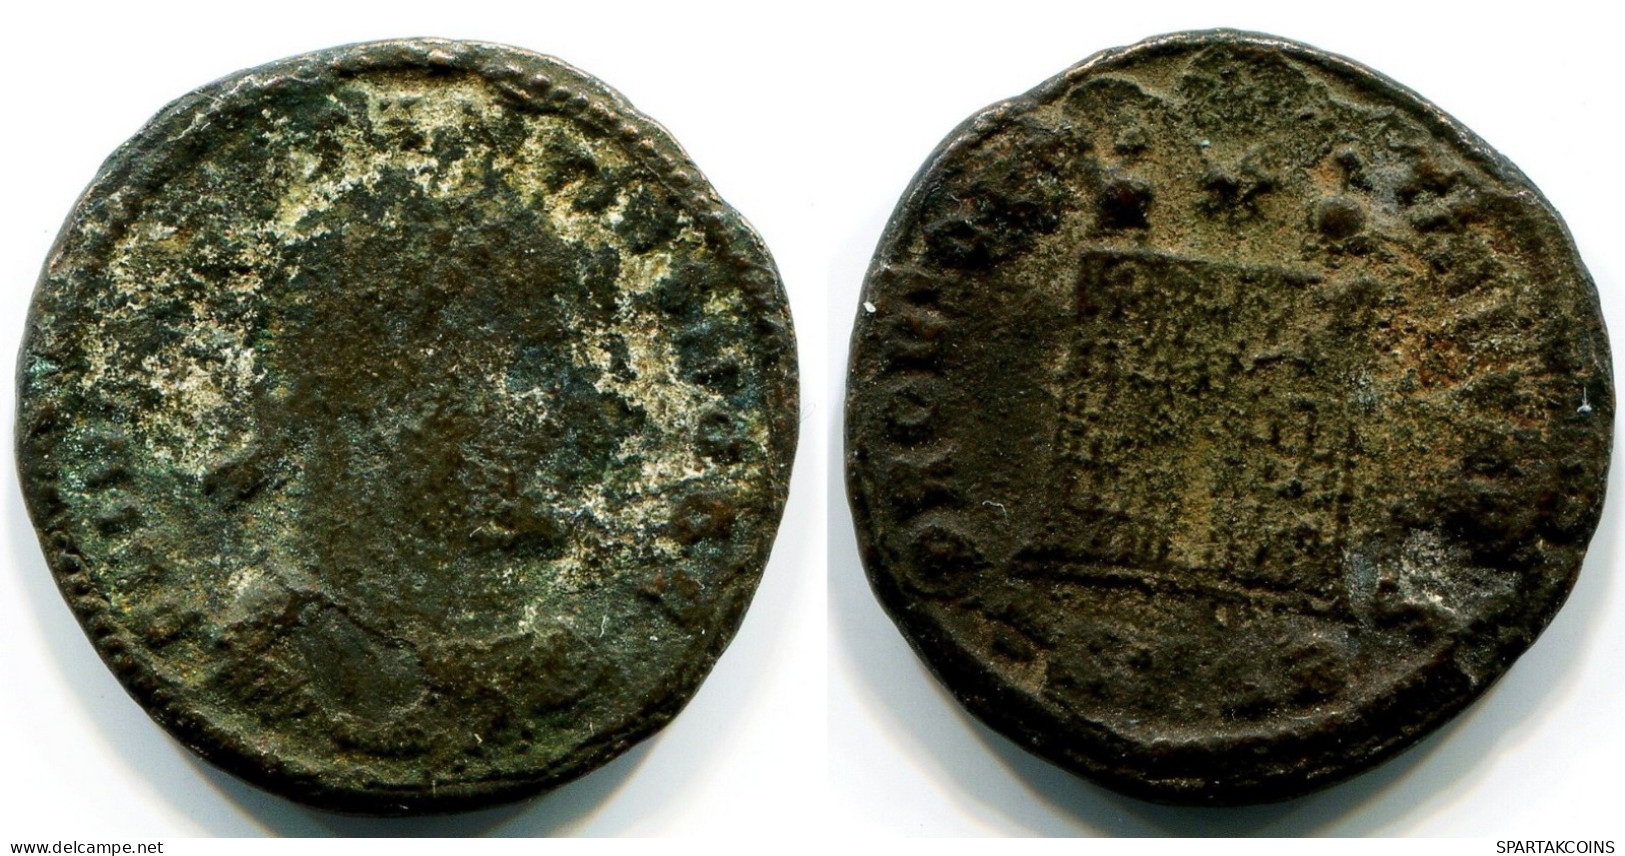 CONSTANTINE I THESSALONICA FROM THE ROYAL ONTARIO MUSEUM #ANC11140.14.E.A - The Christian Empire (307 AD To 363 AD)